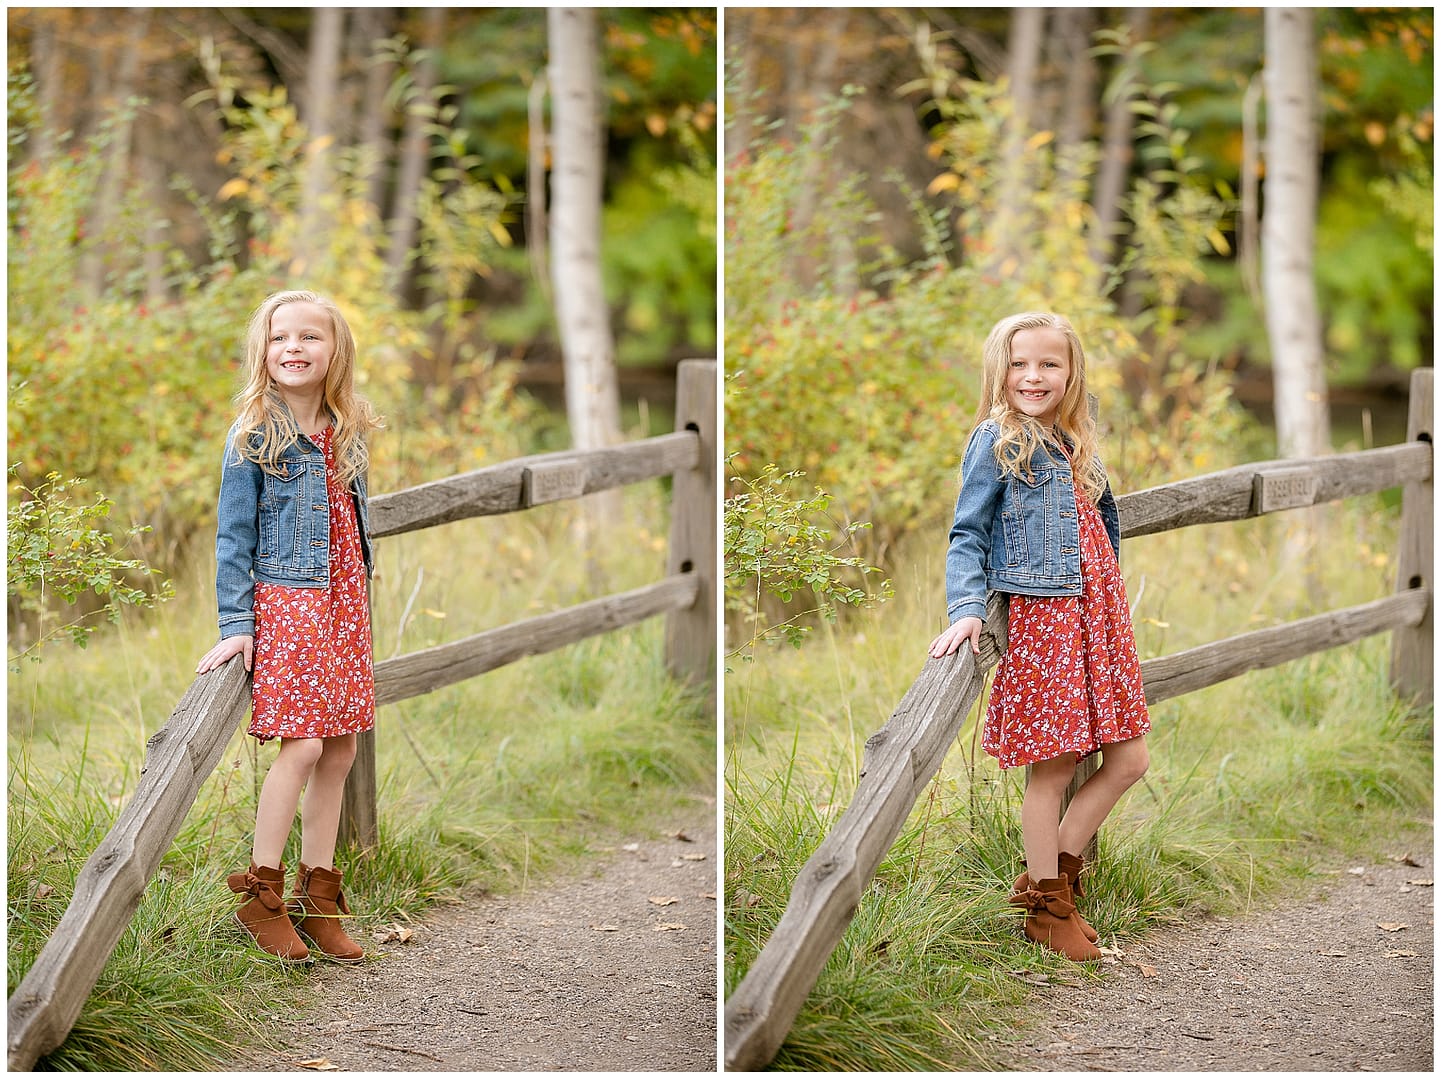 Toddler girl leans against fence for portrait. Photo by Tiffany Hix Photography.